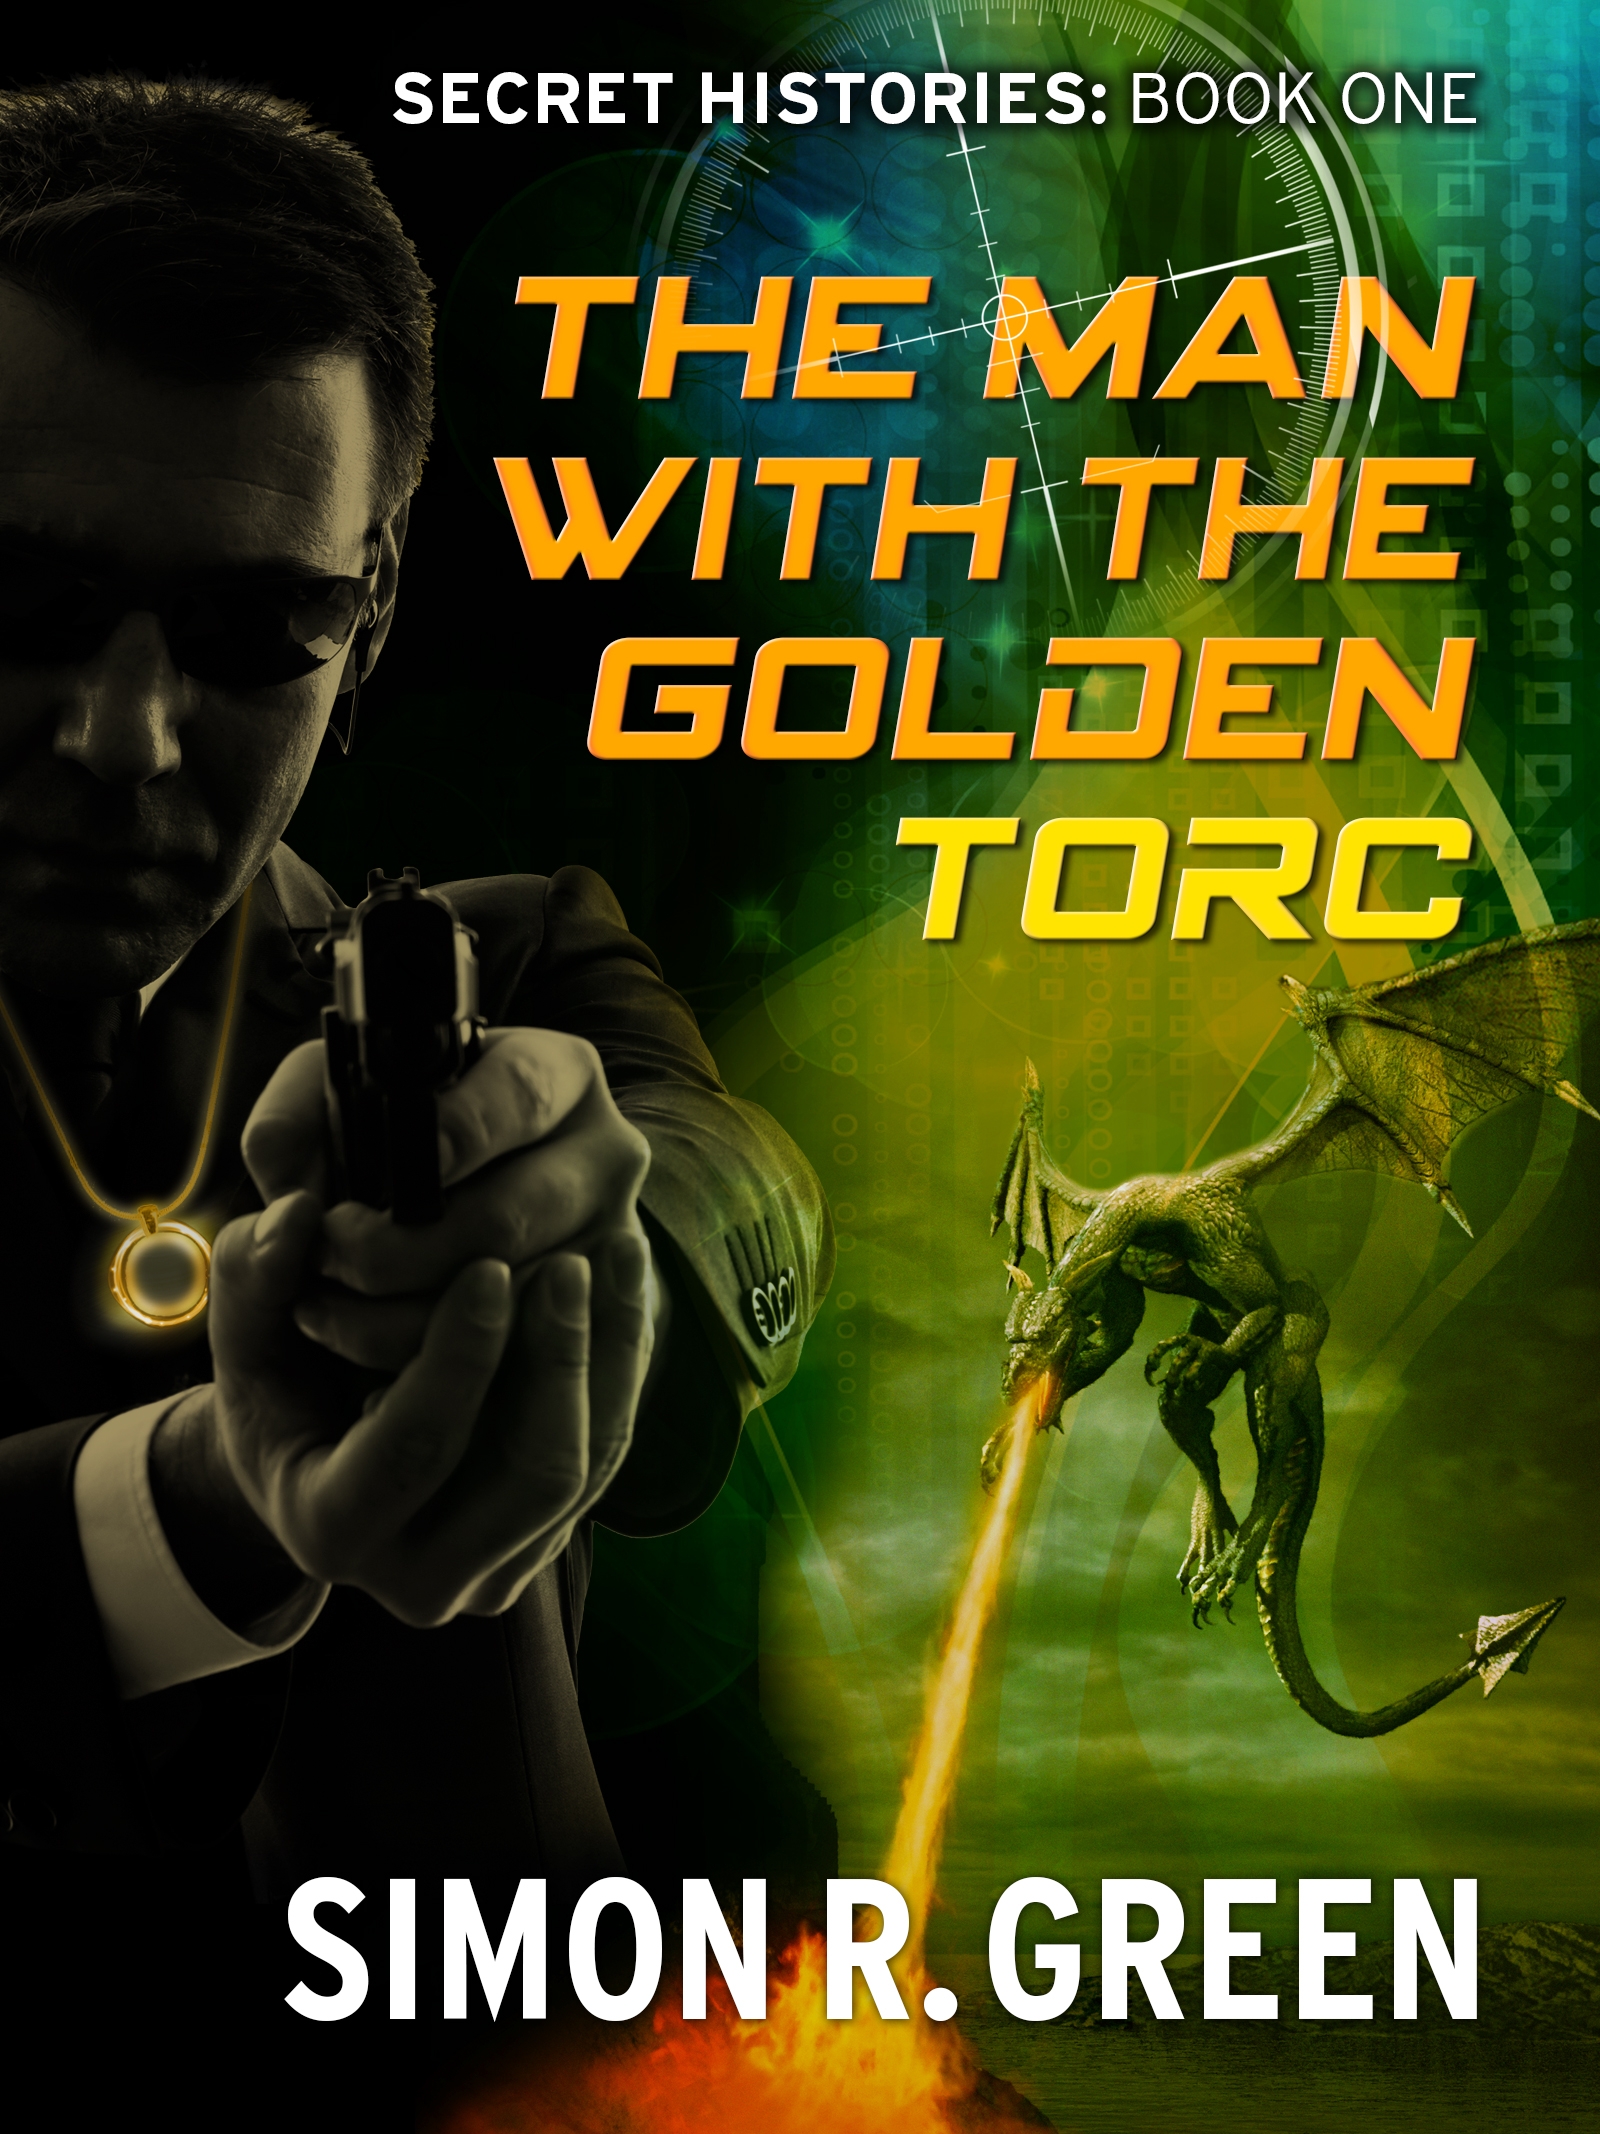 The Man with the Golden Torc by Simon R. Green